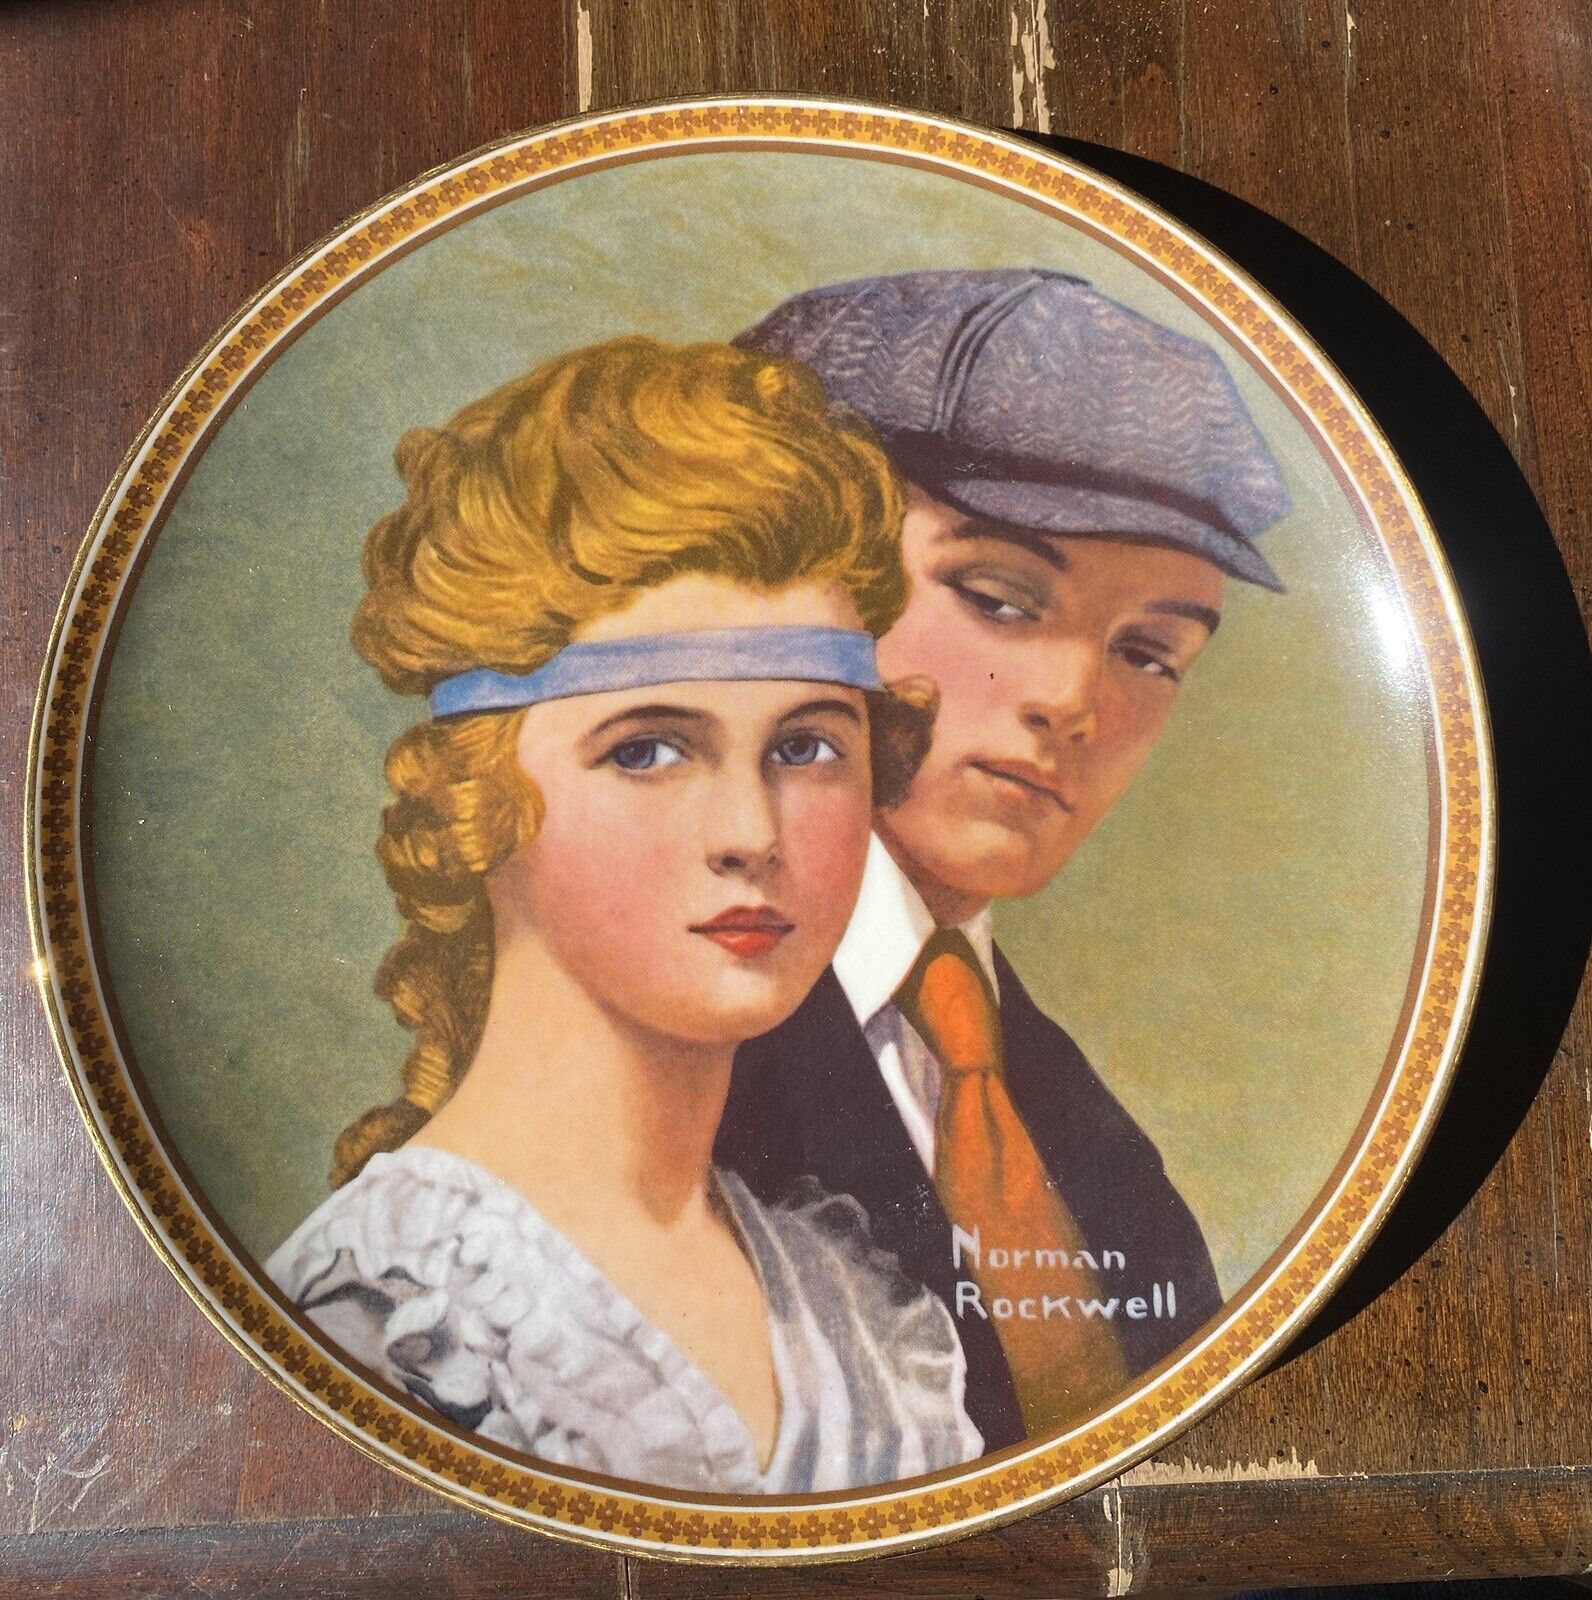 Norman Rockwell “Rediscovered Women” Decorative Plate